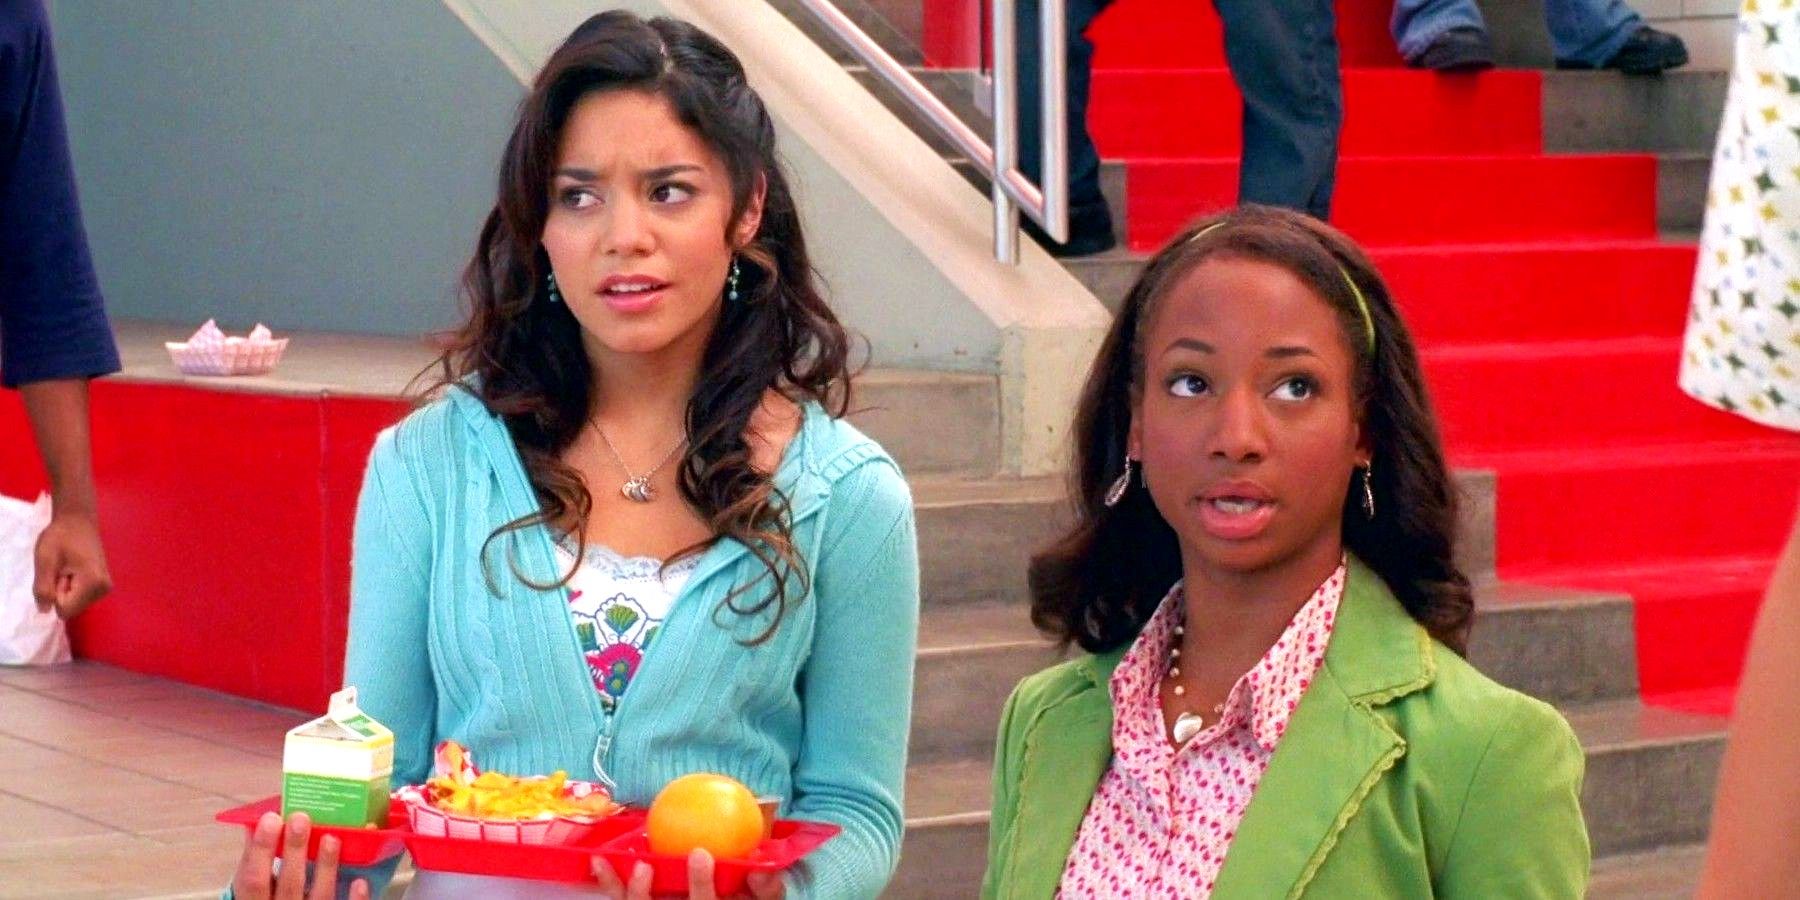 Vanessa Hudgens and Monique Coleman as Gabriella and Taylor at the cafeteria in High School Musical